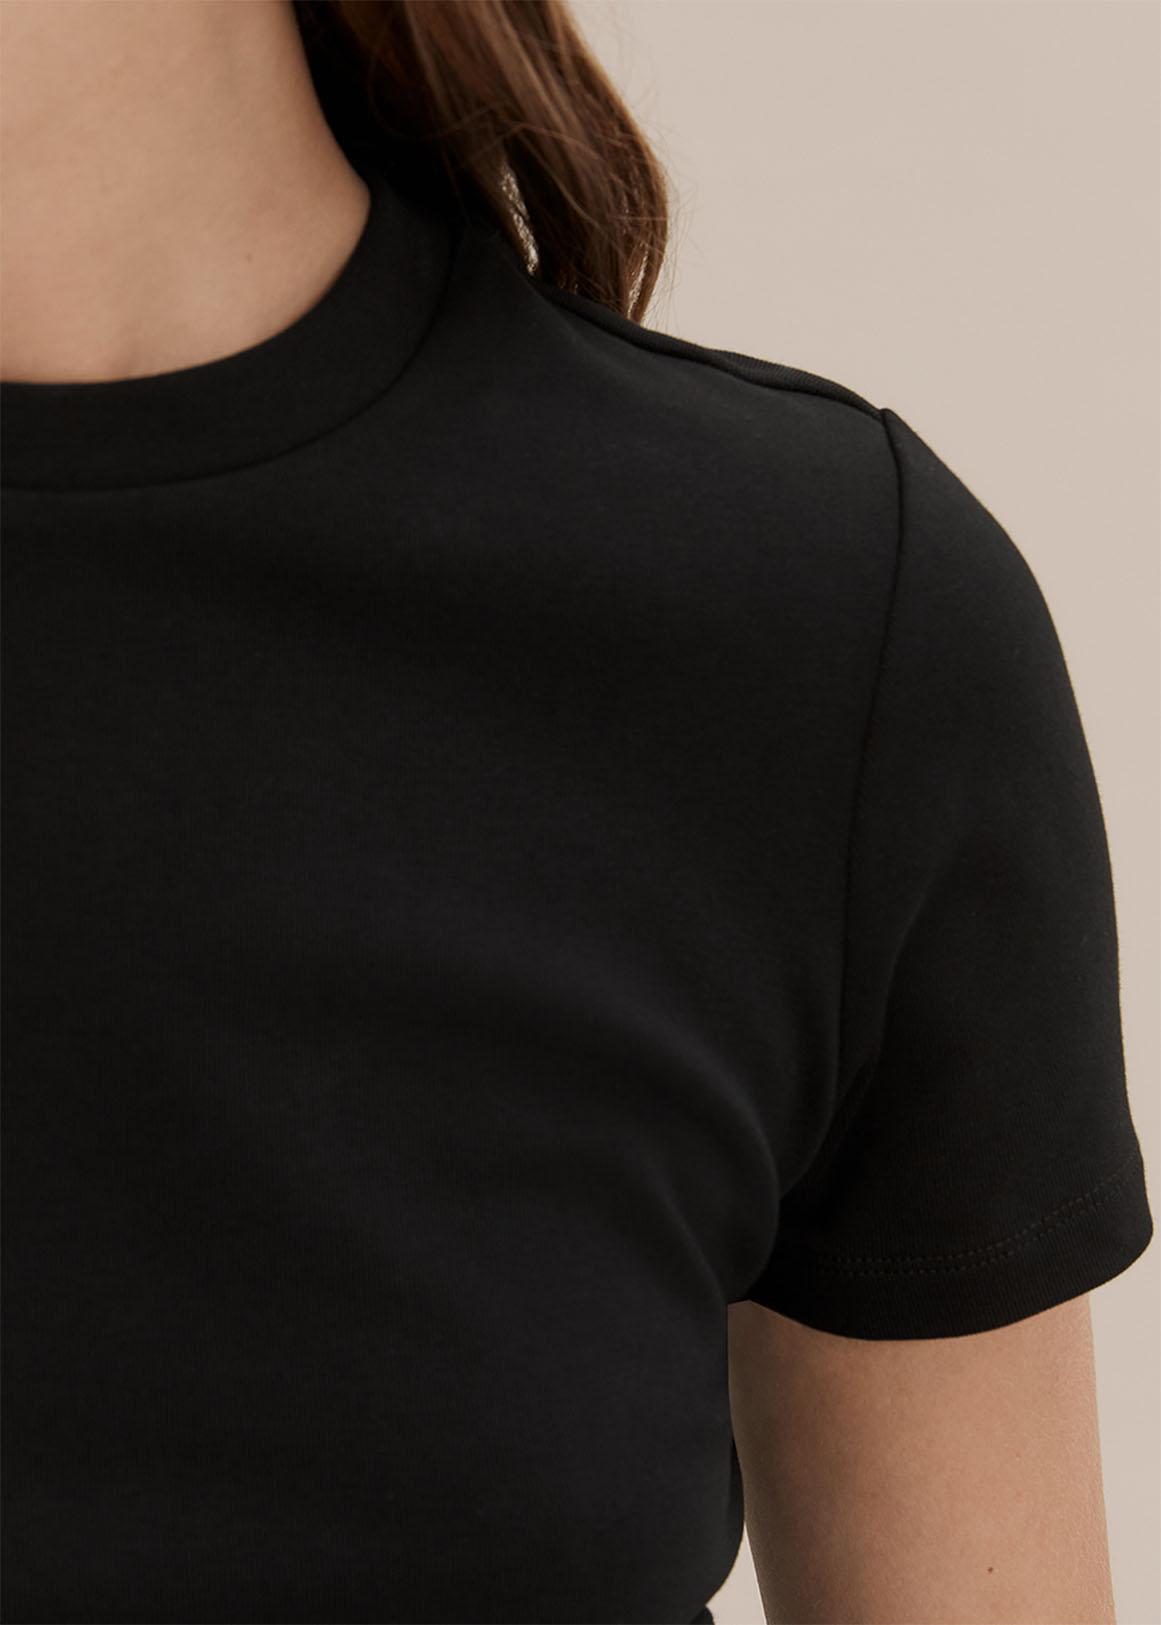 Basic Black Cotton Blend Fitted T Shirt